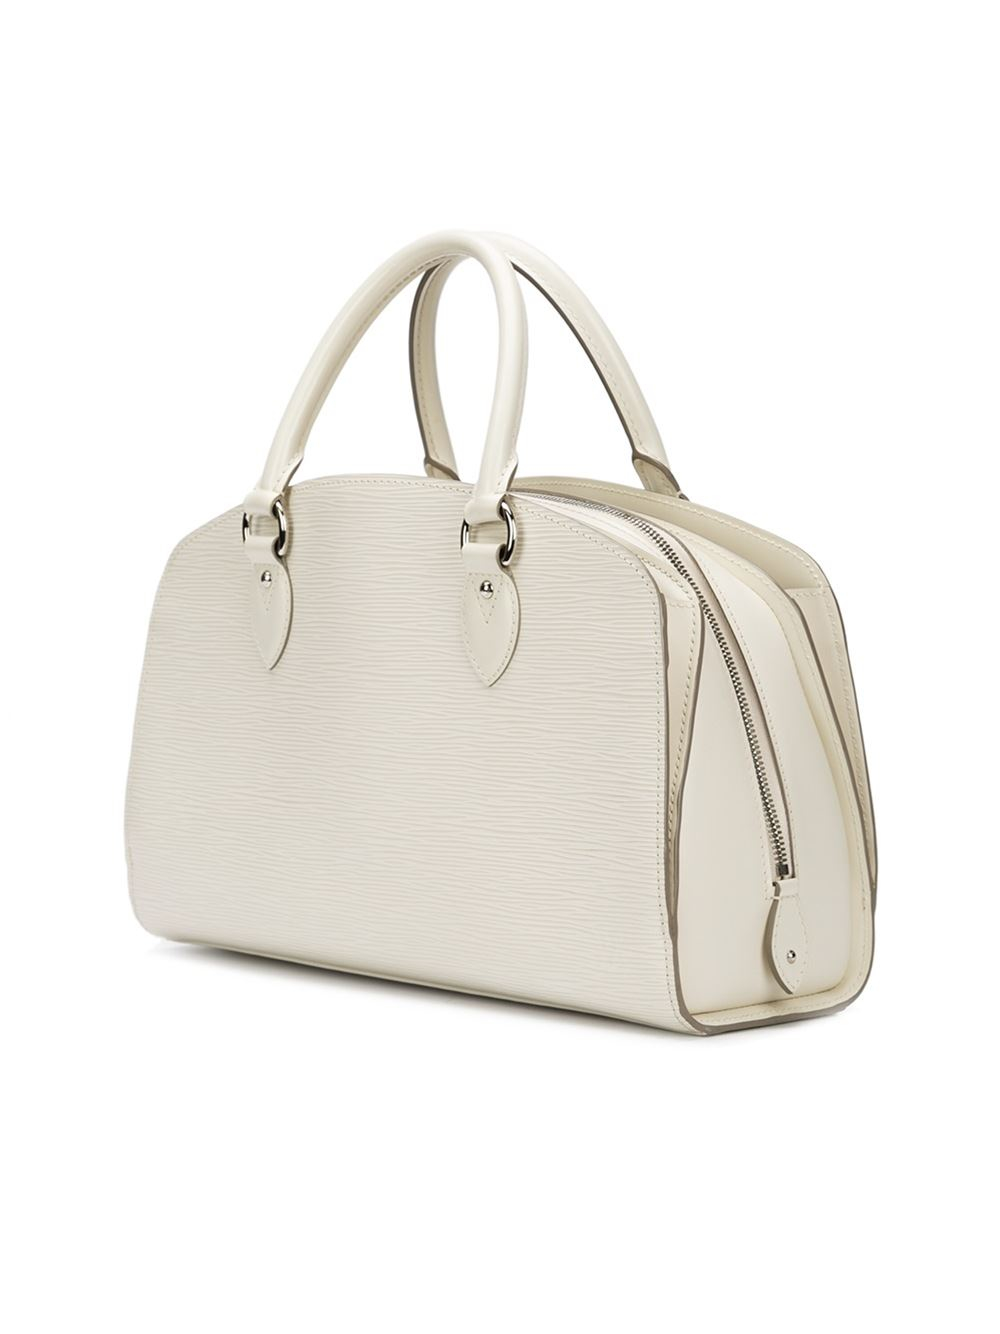 Louis Vuitton Leather Bowling Style Tote Bag in White - Lyst